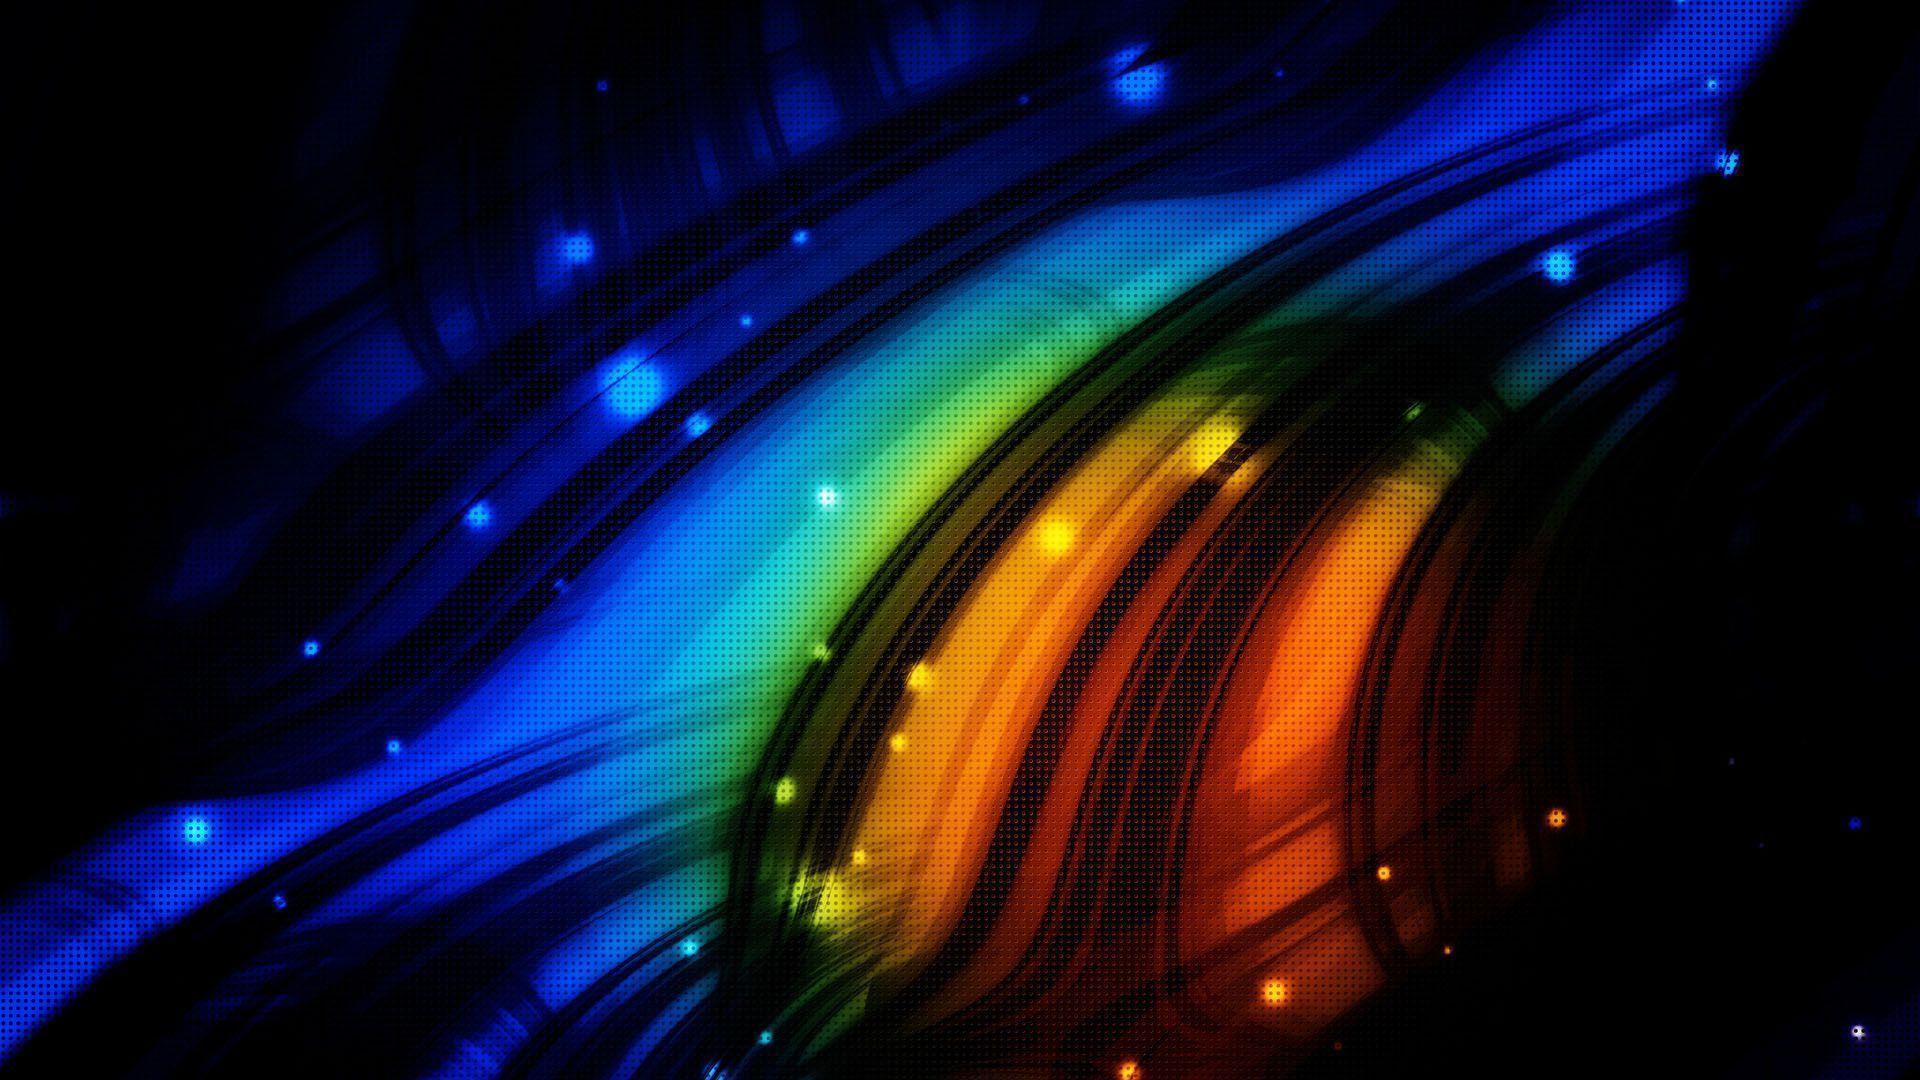 Wallpaper background abstract 1920x1200 px - Wallpaper